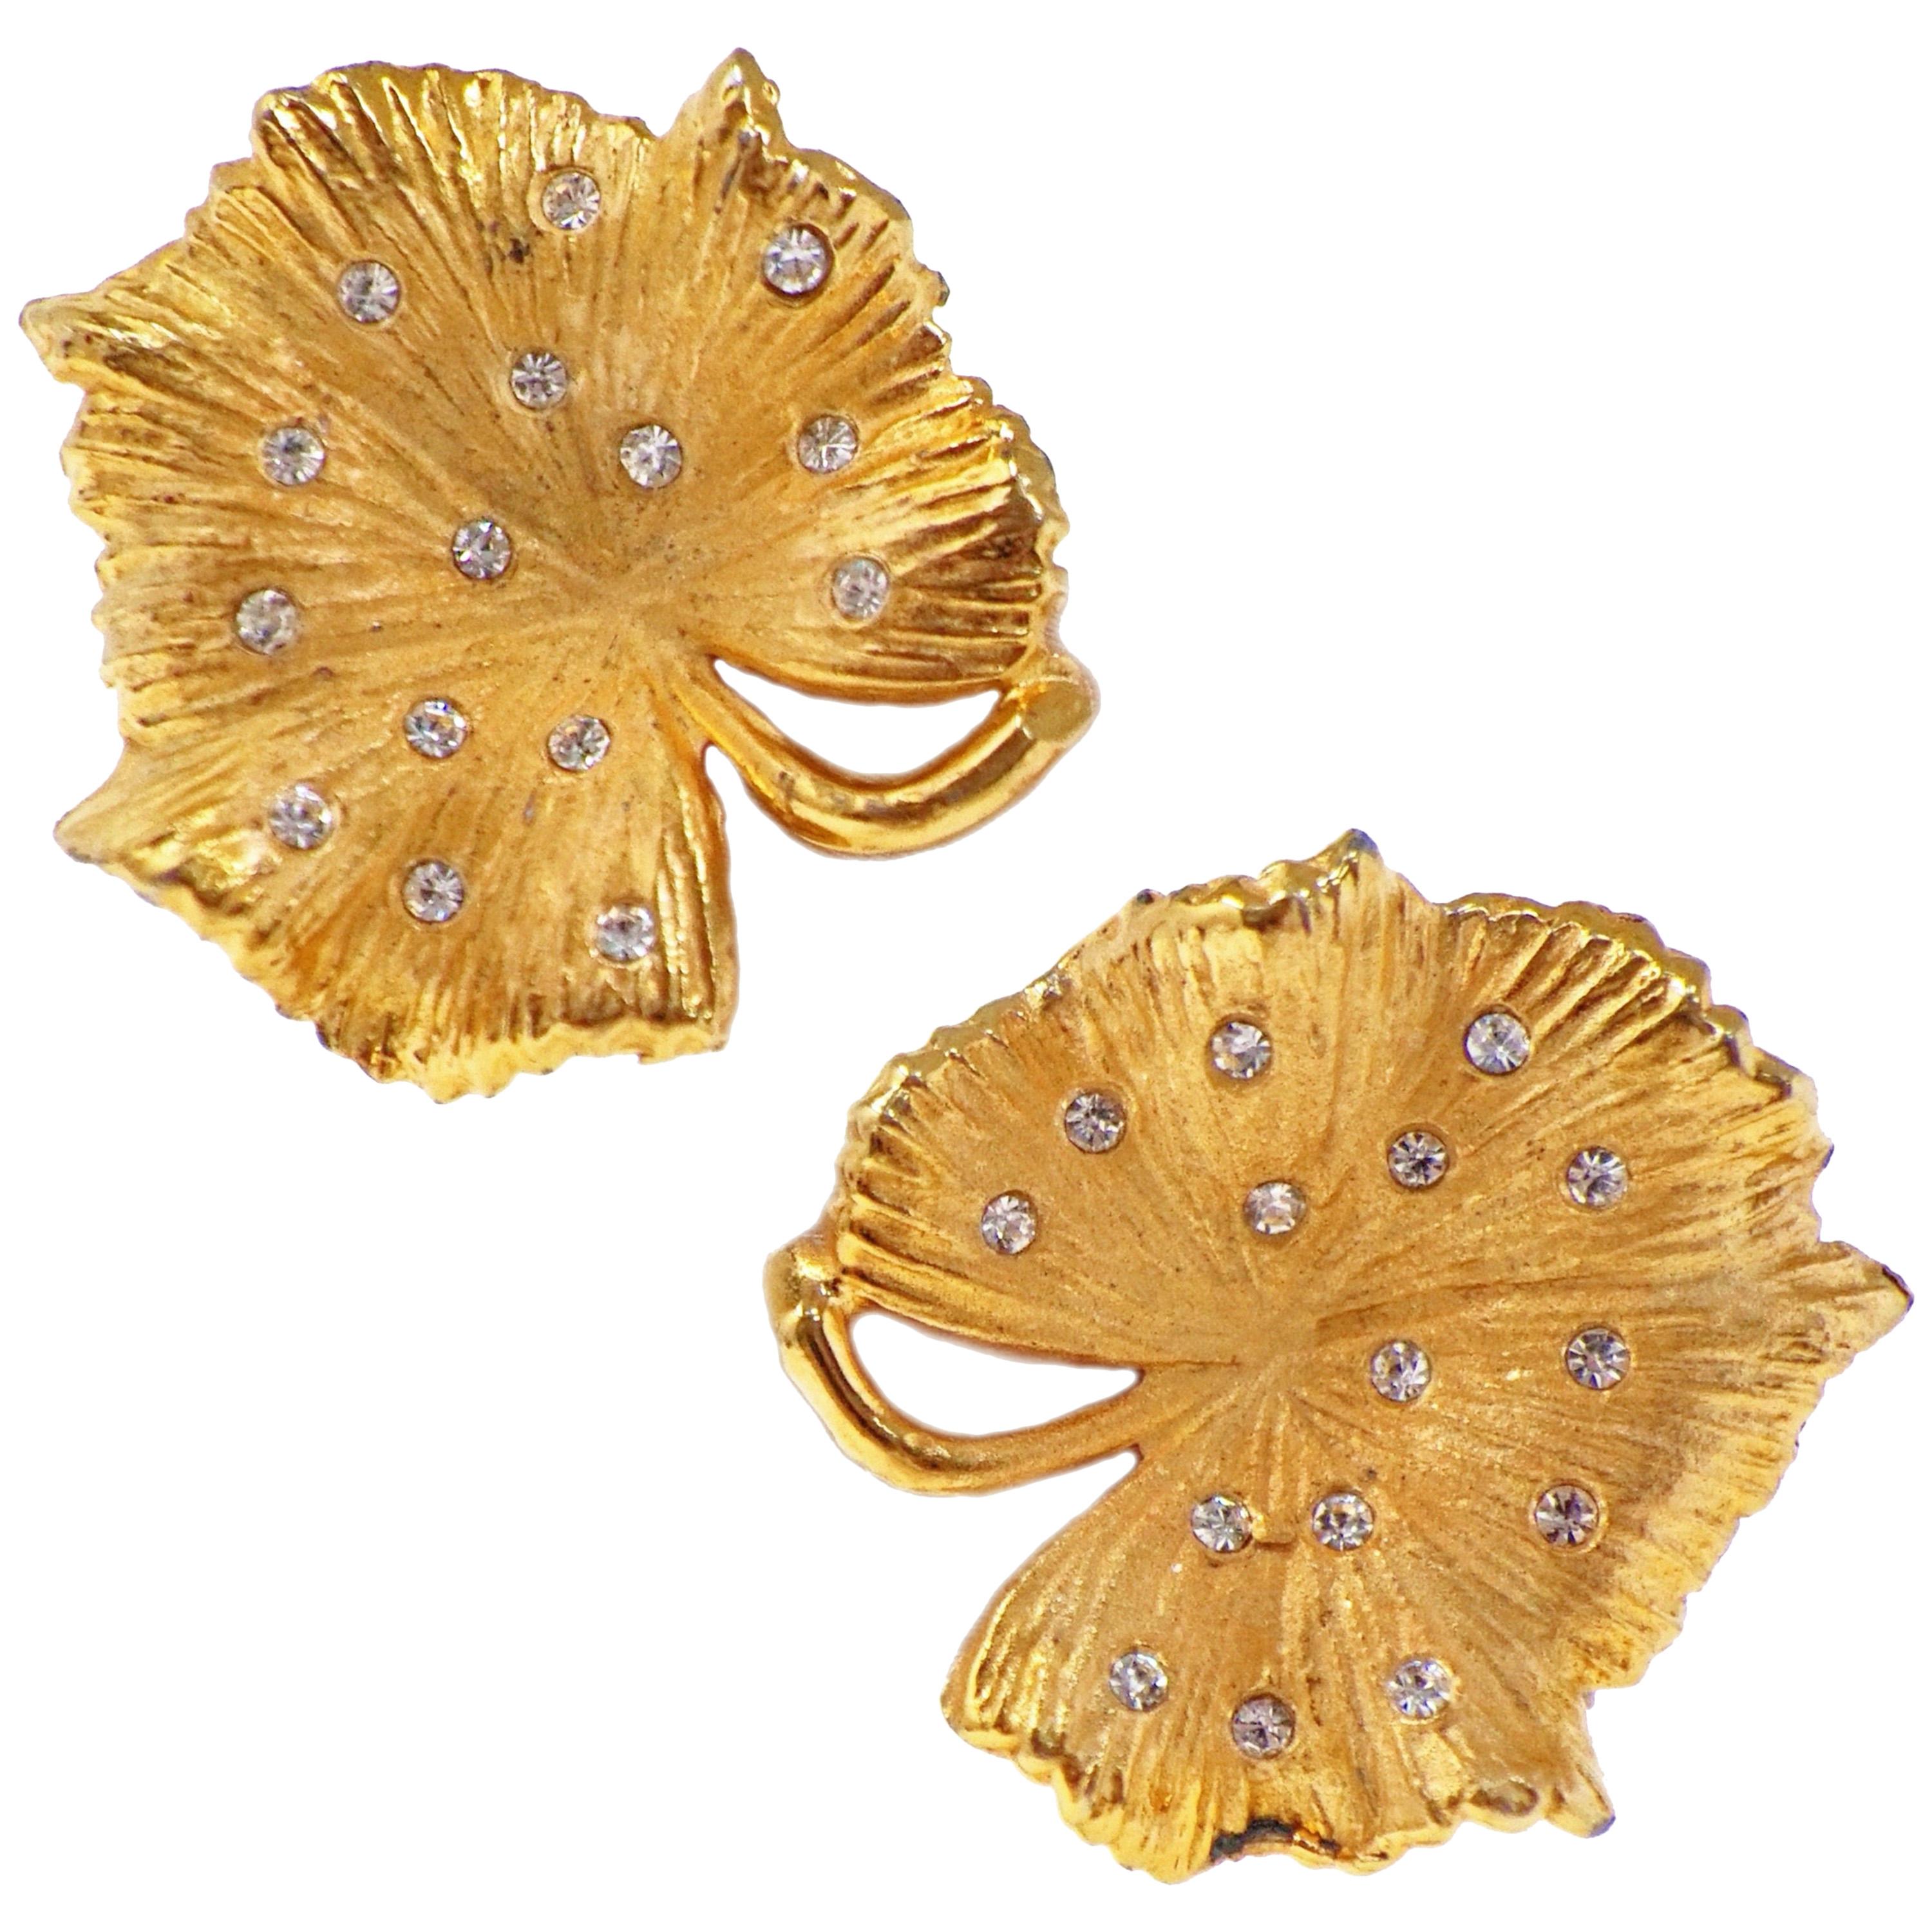 Vintage Gilded Leaf Earrings with Crystal Accents by Claudette, circa 1950s